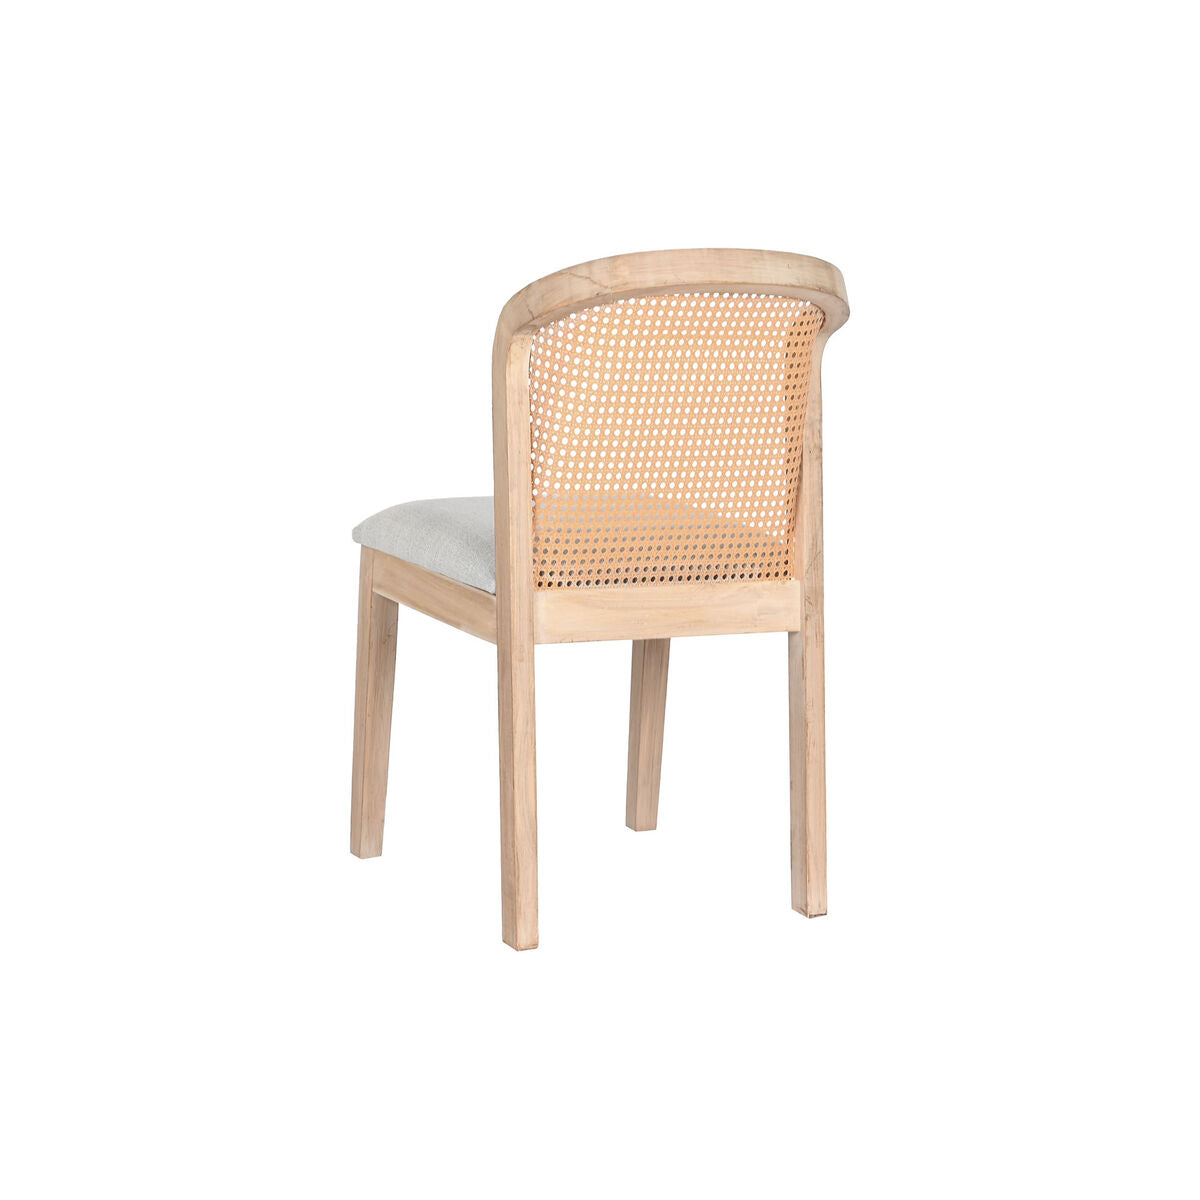 Dark Grey Dining Chair in Wood and Rattan (46 x 61 x 86 cm)